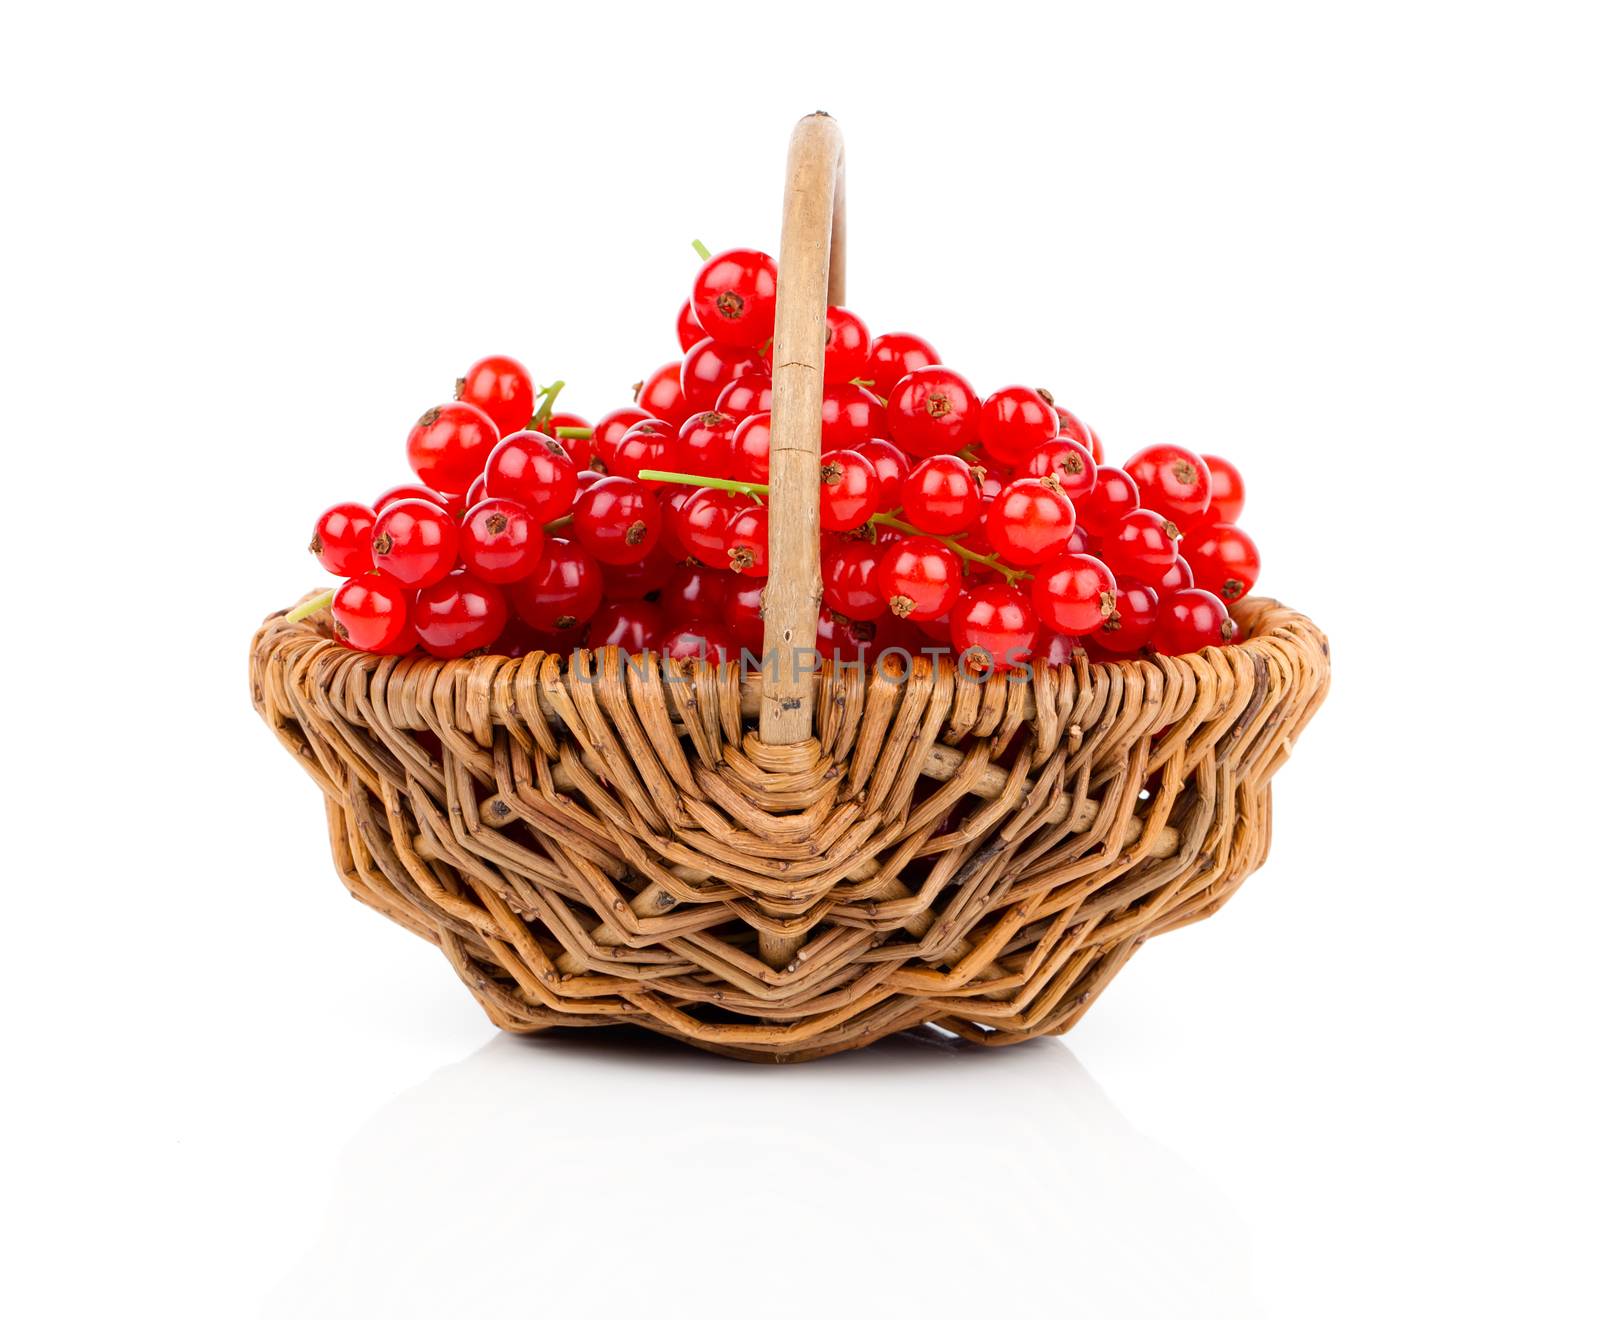 a basket of ripe juicy red currant on white background by motorolka